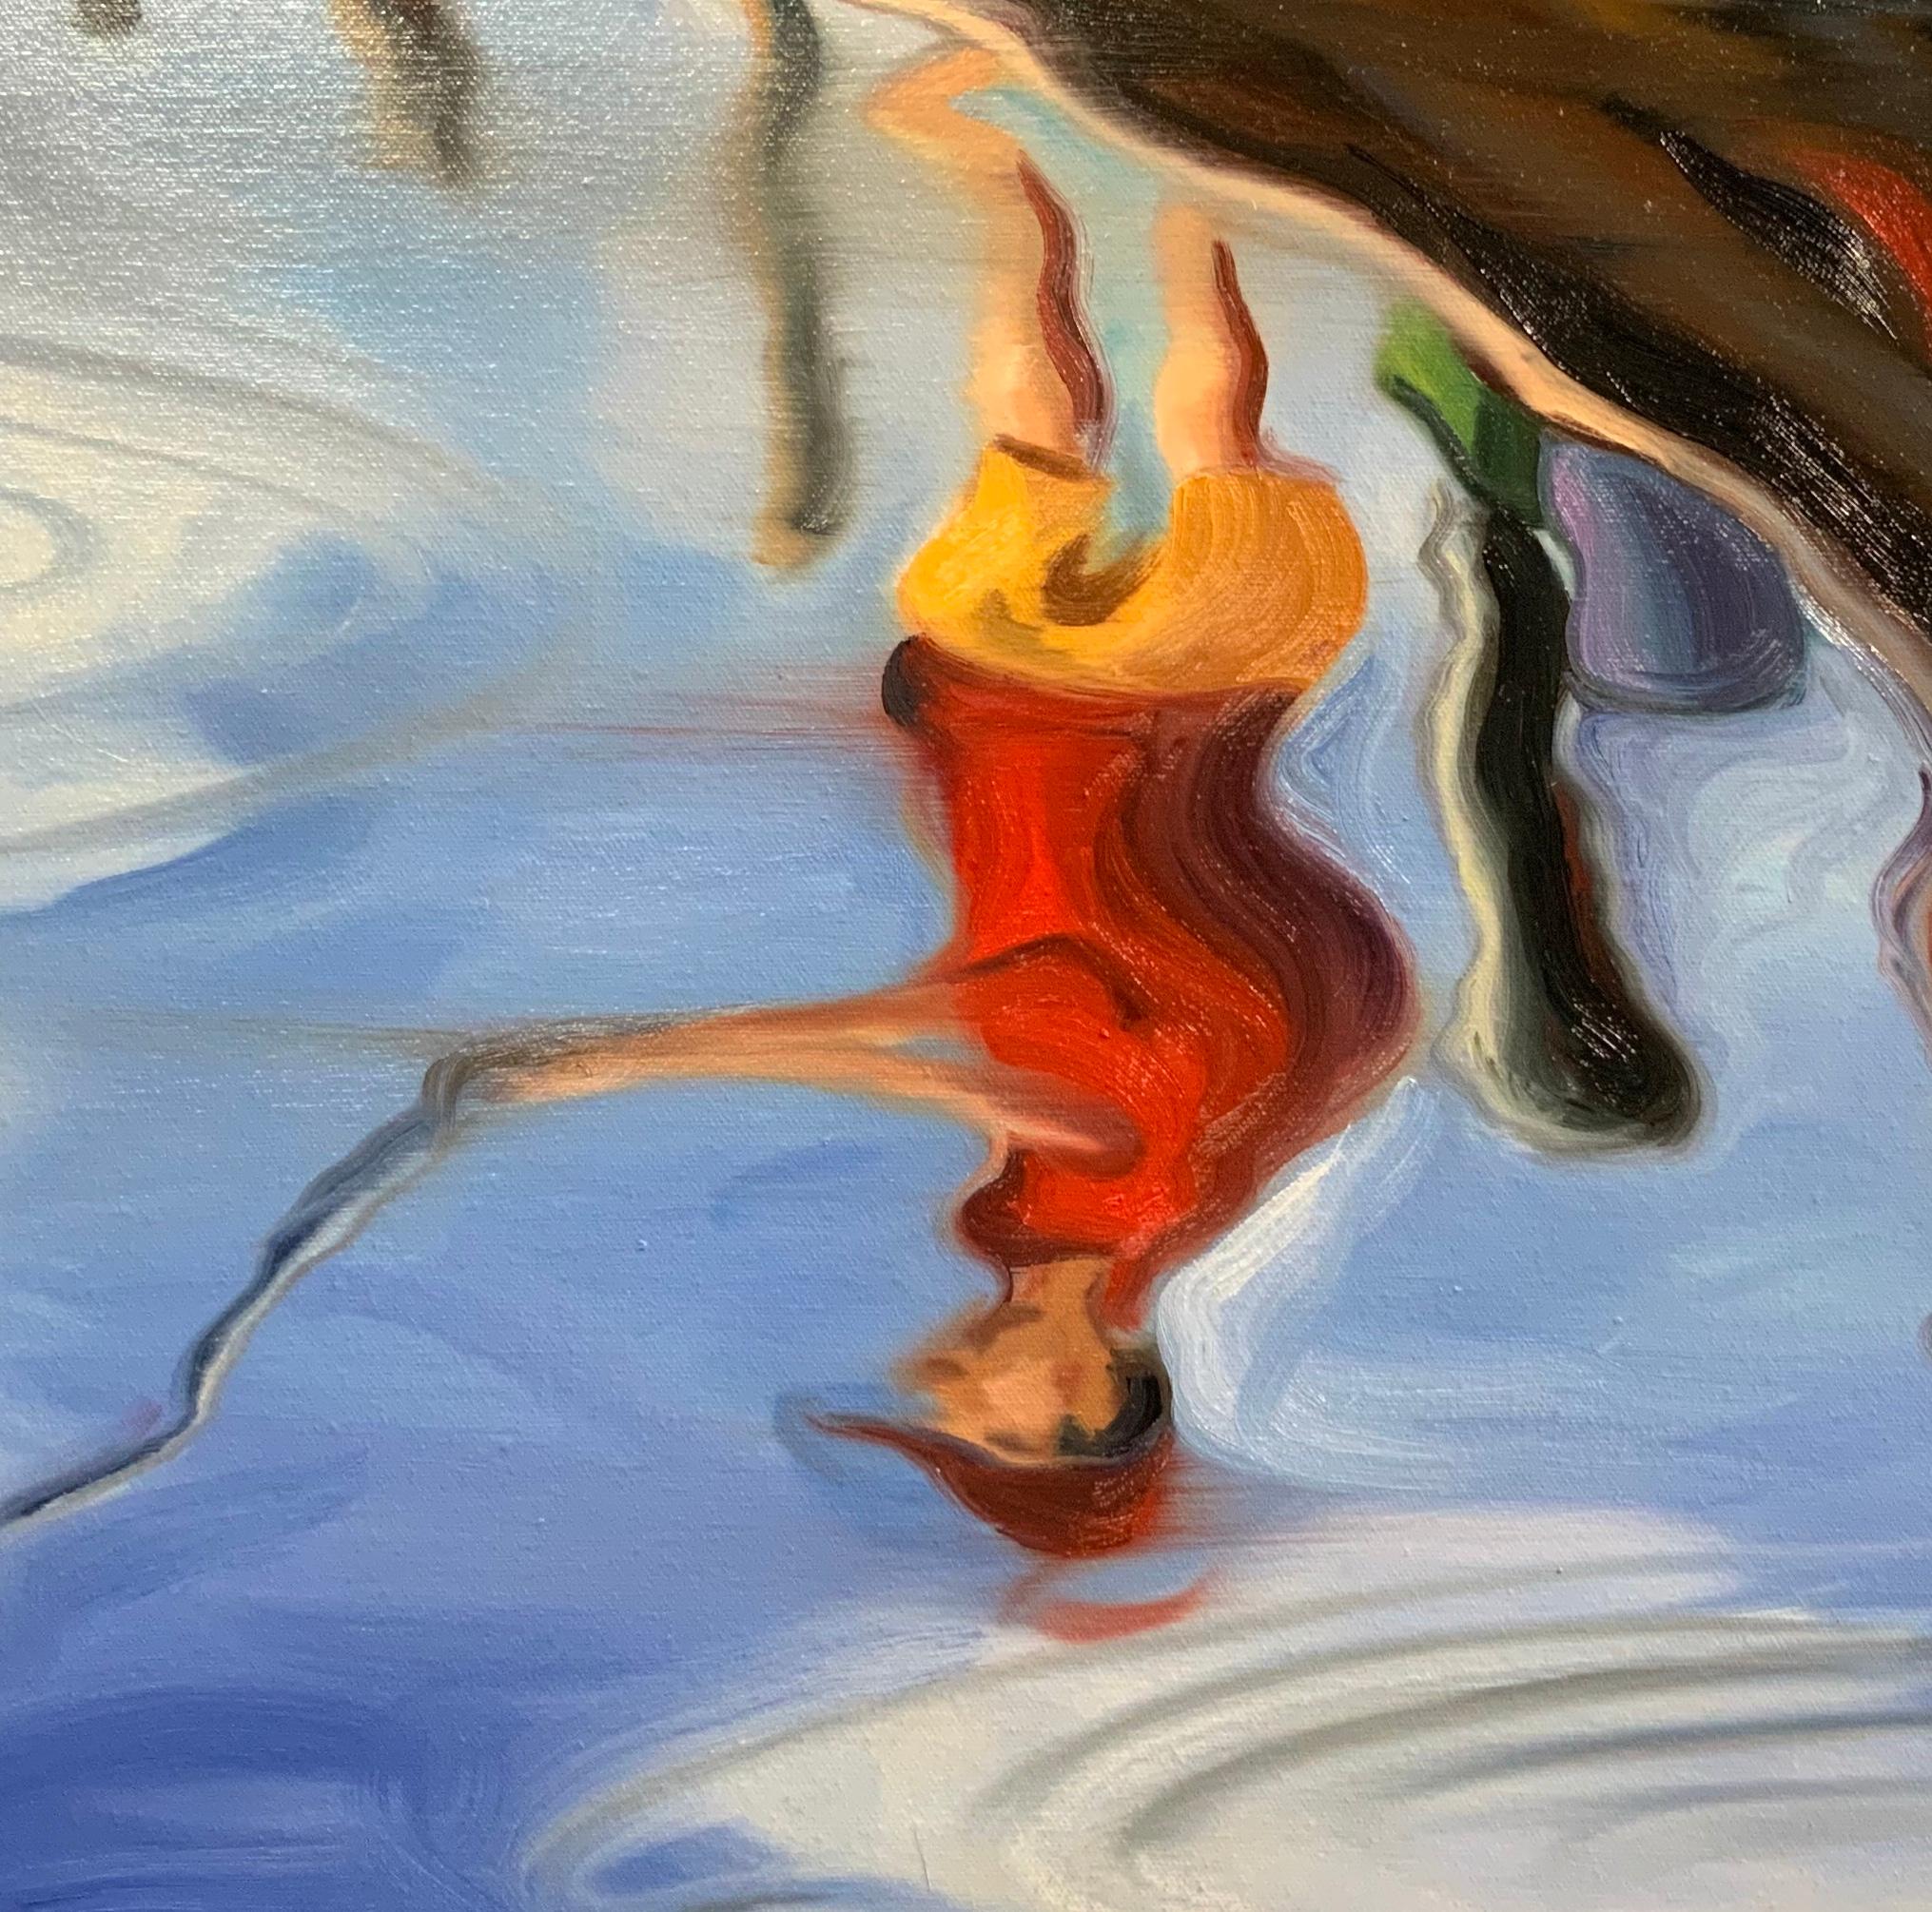 <p>Artist Comments<br />A man casts off from a dock in morning sunshine, his reflection softly distorted in the lapping water below. 